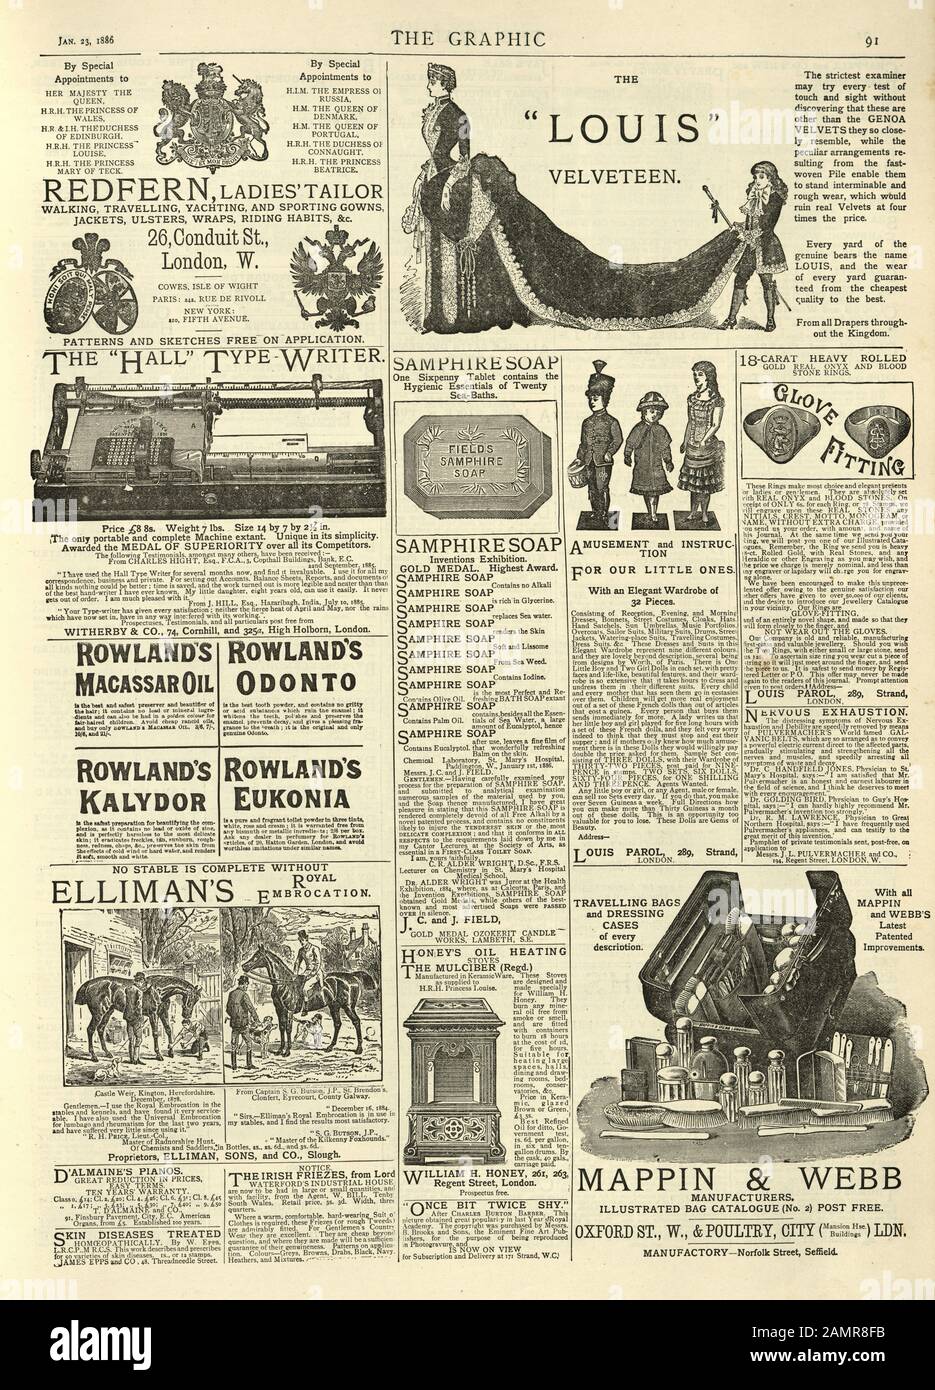 Page of adverts from the Graphic illustrated newspaper 1886, Louis Velveteen, Hall type writer, samphire soap, Ellimans royal embrocation, Mappin and Webb Stock Photo